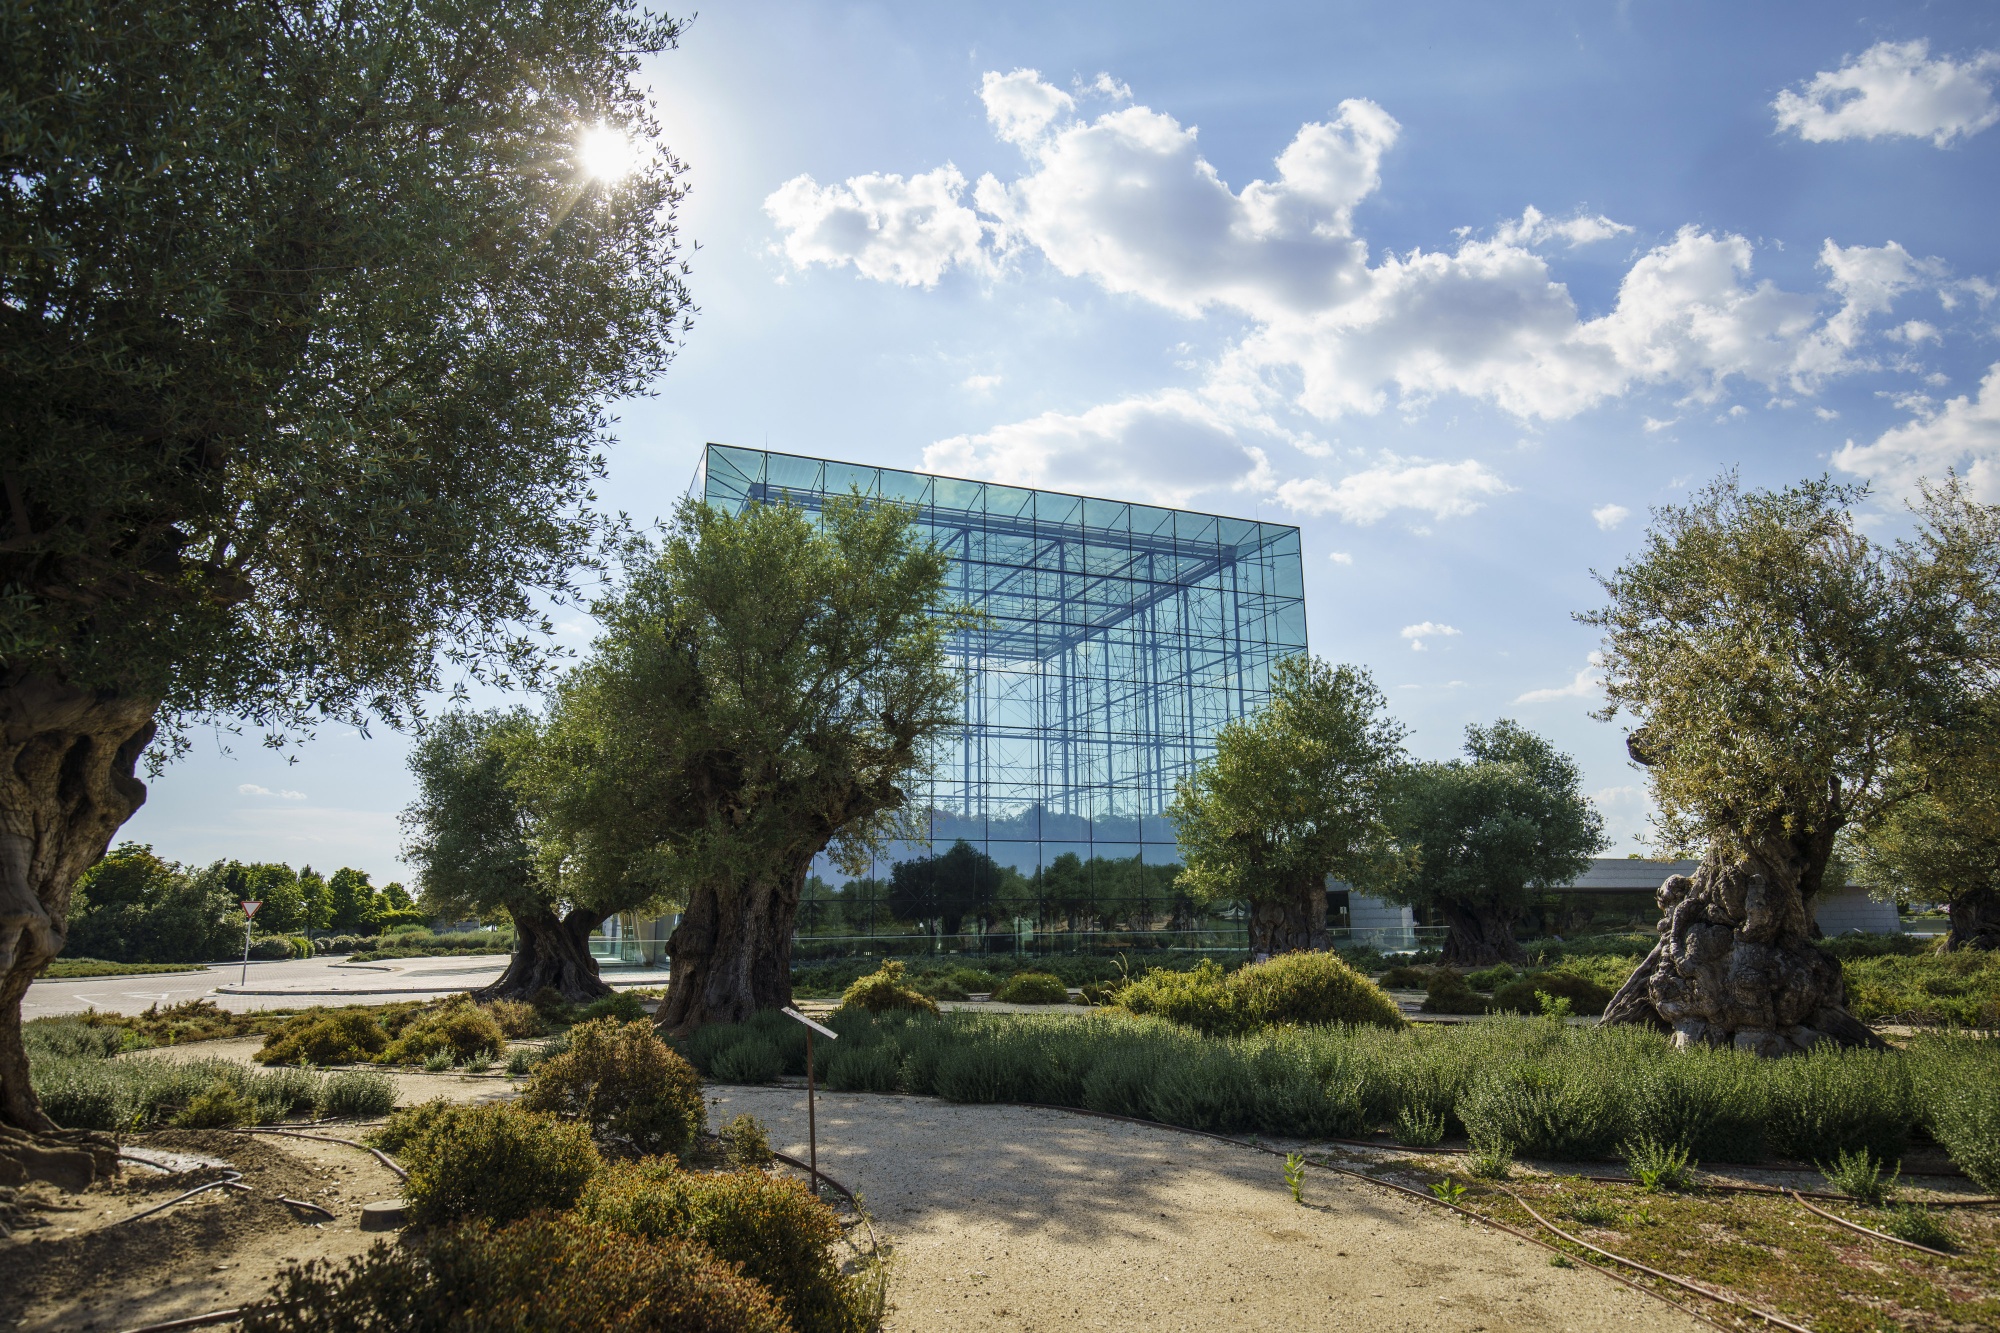 The Faro buildings is seen amongst olive trees, some over a thousand years old, inside the Santander Ciudad Financiera in Boadilla del Monte outside Madrid, May 29.